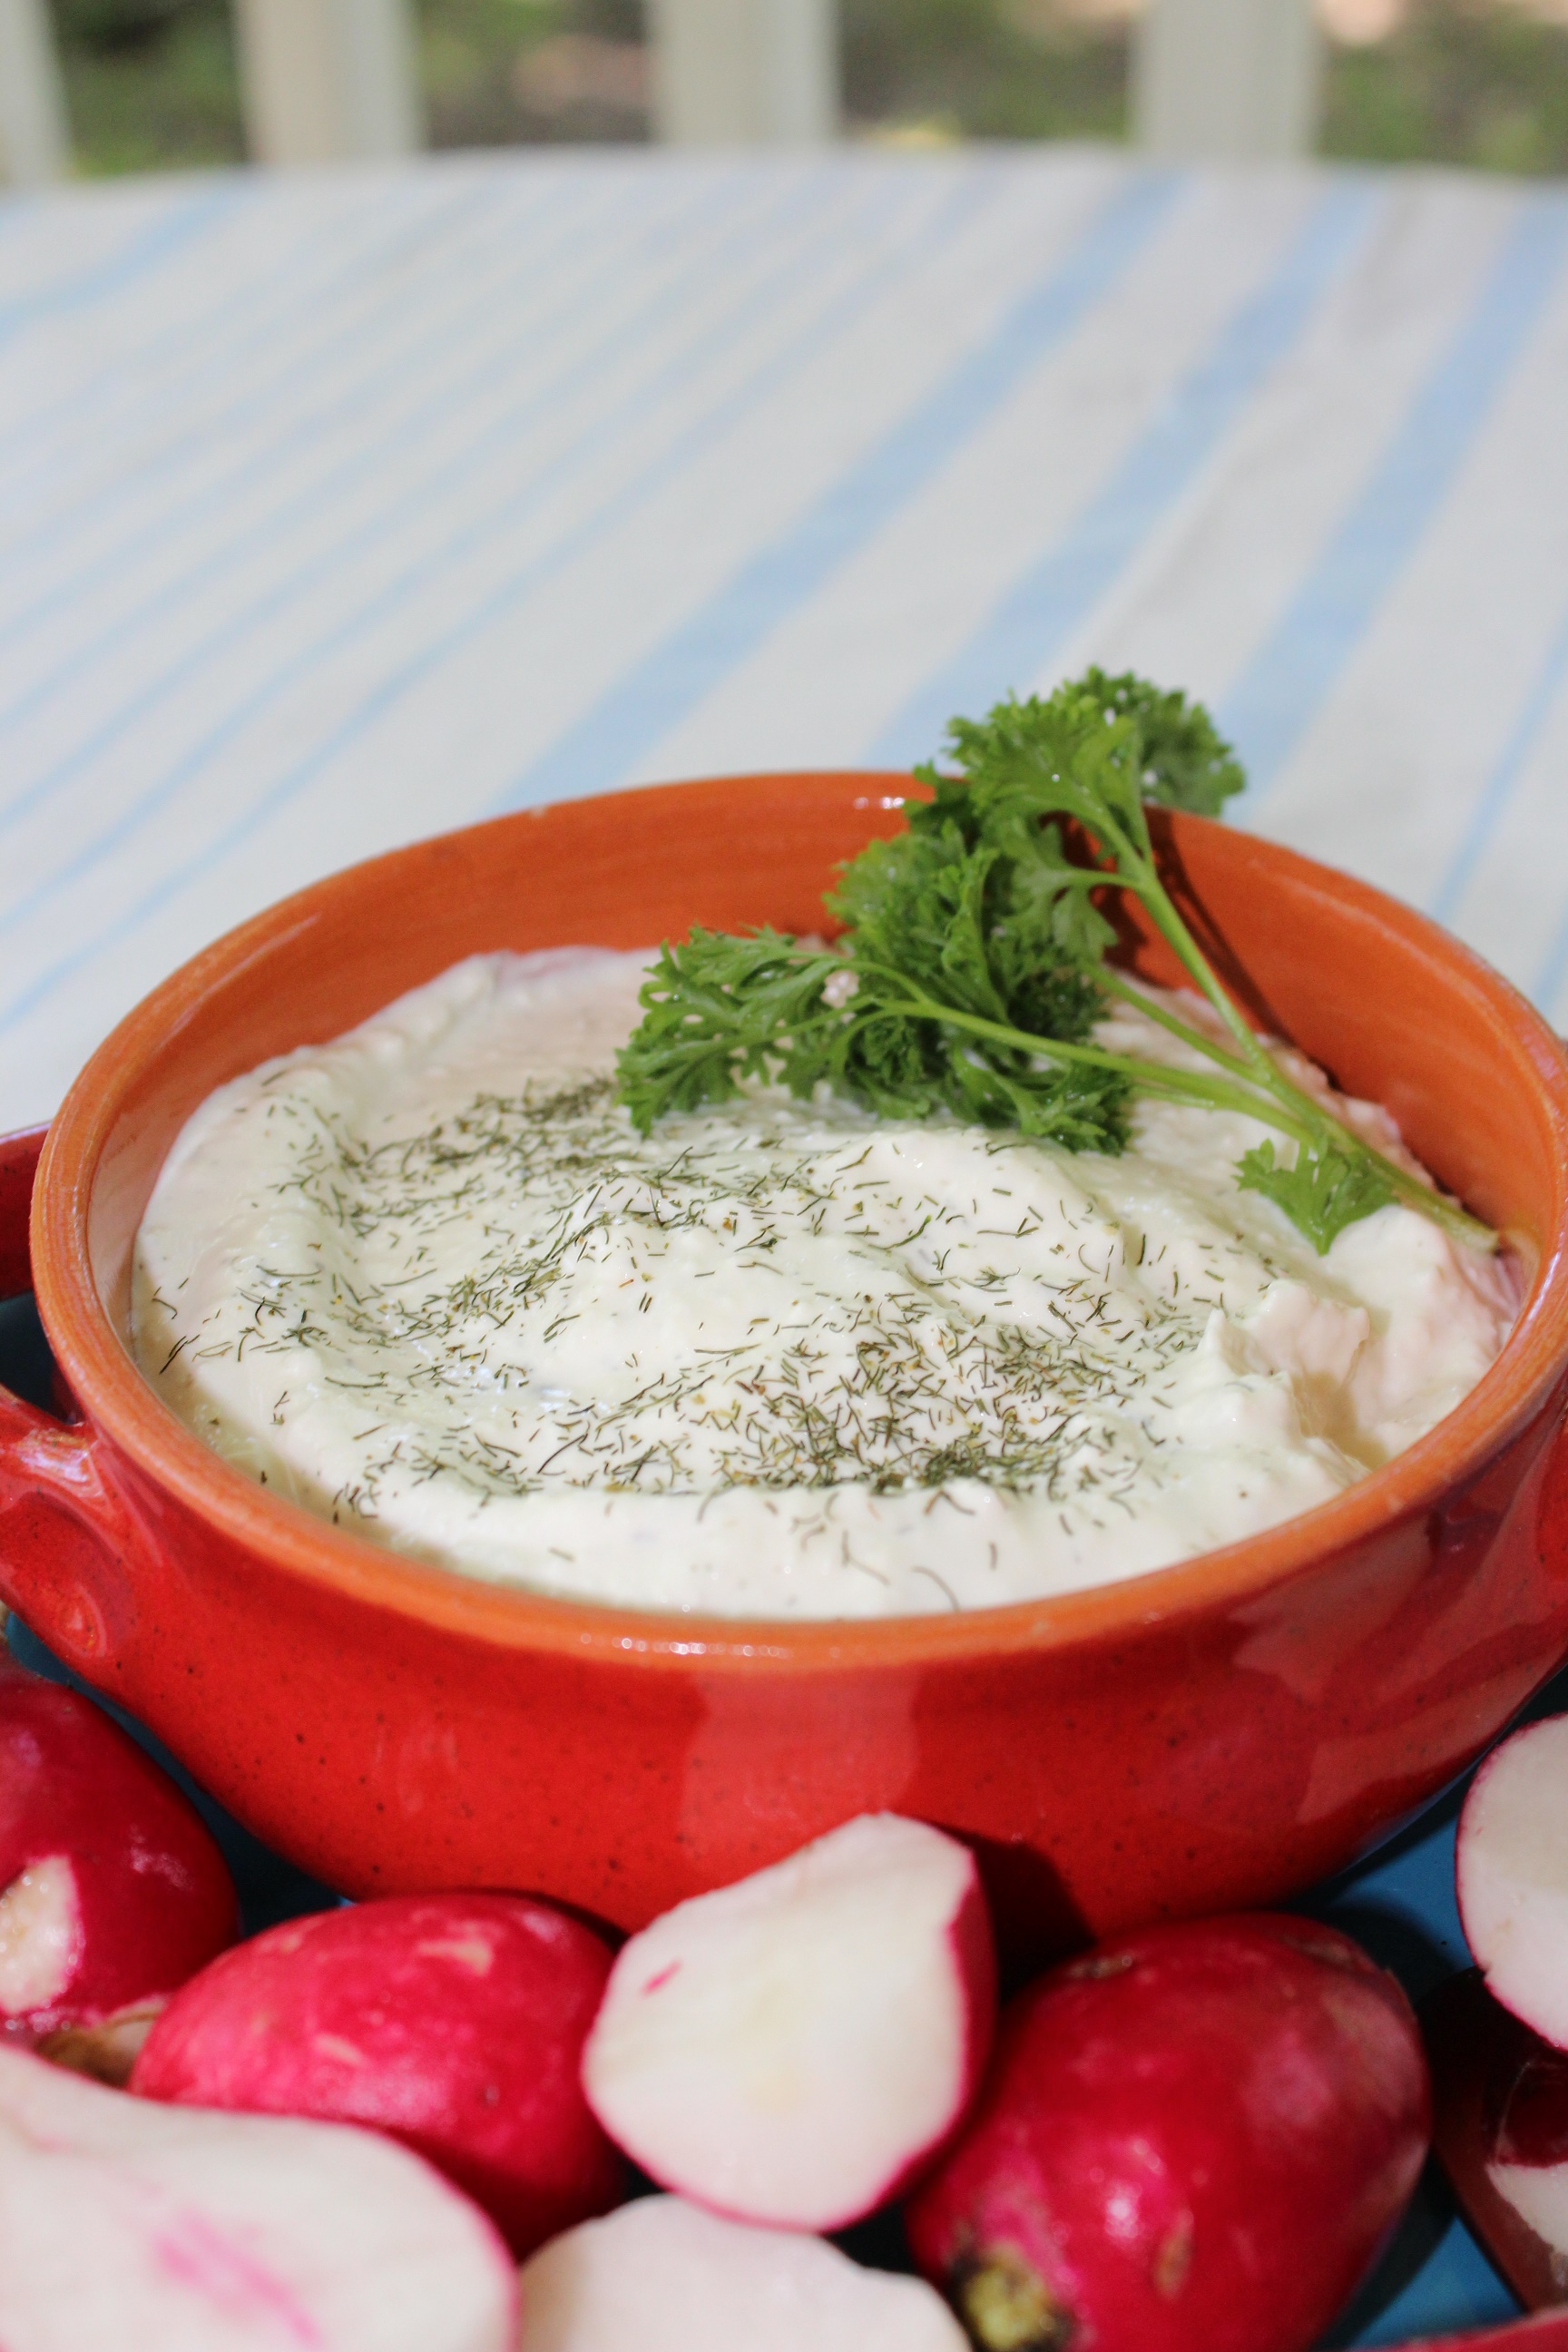 Creamy Feta Herb Spread - In The Kitchen With April